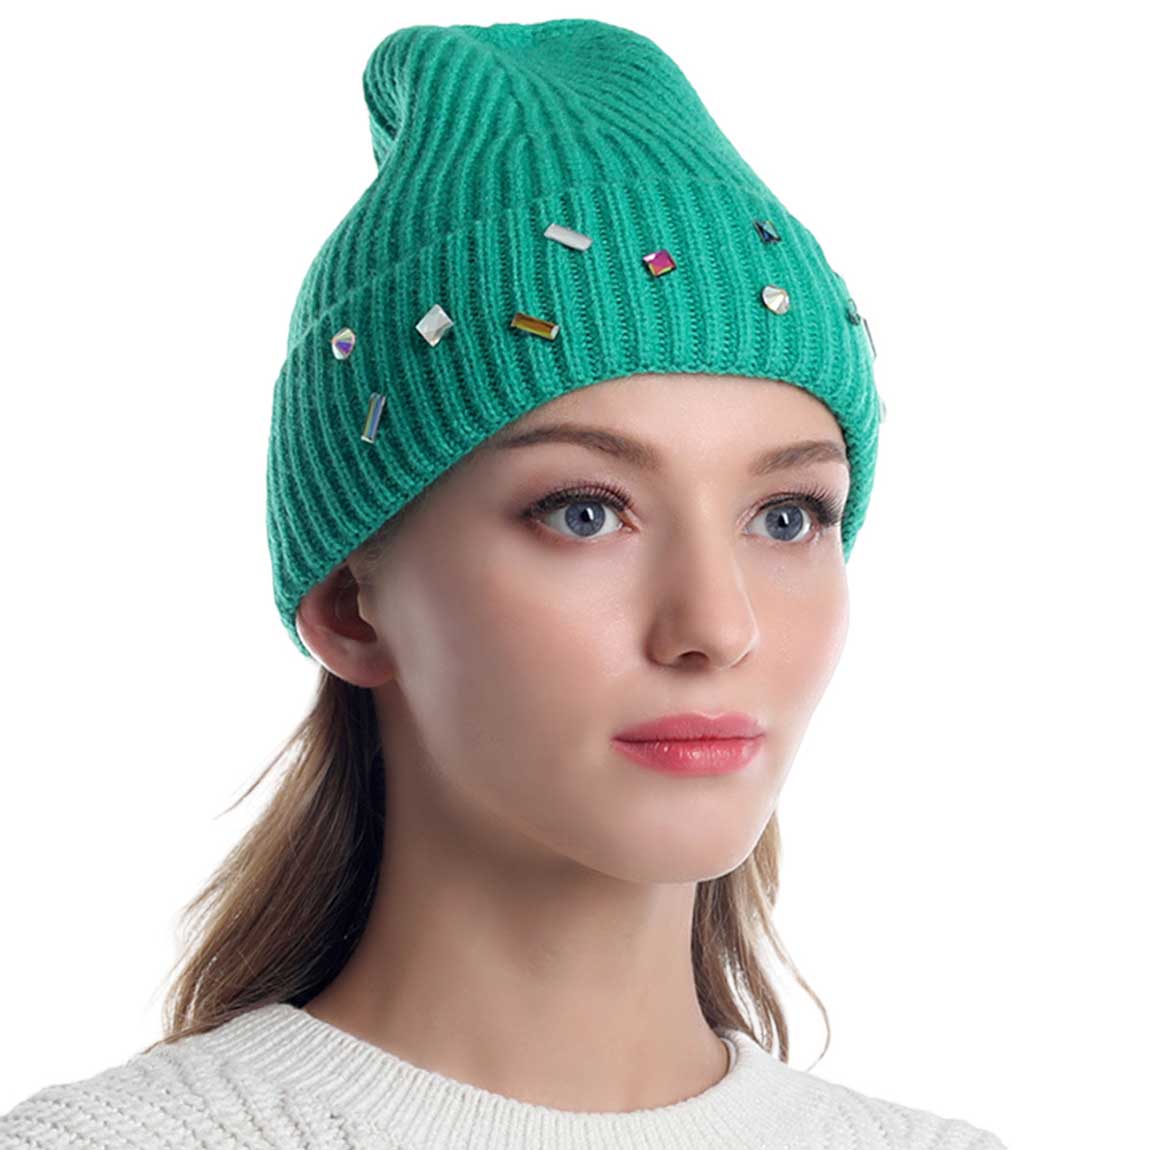 Green Bling Stone Embellished Knit Beanie Hat, wear this beautiful beanie hat with any ensemble for the perfect finish before running out the door into the cool air. The hat is made in a unique style and it's richly warm and comfortable for winter and cold days. Perfect gift item for all occasions.